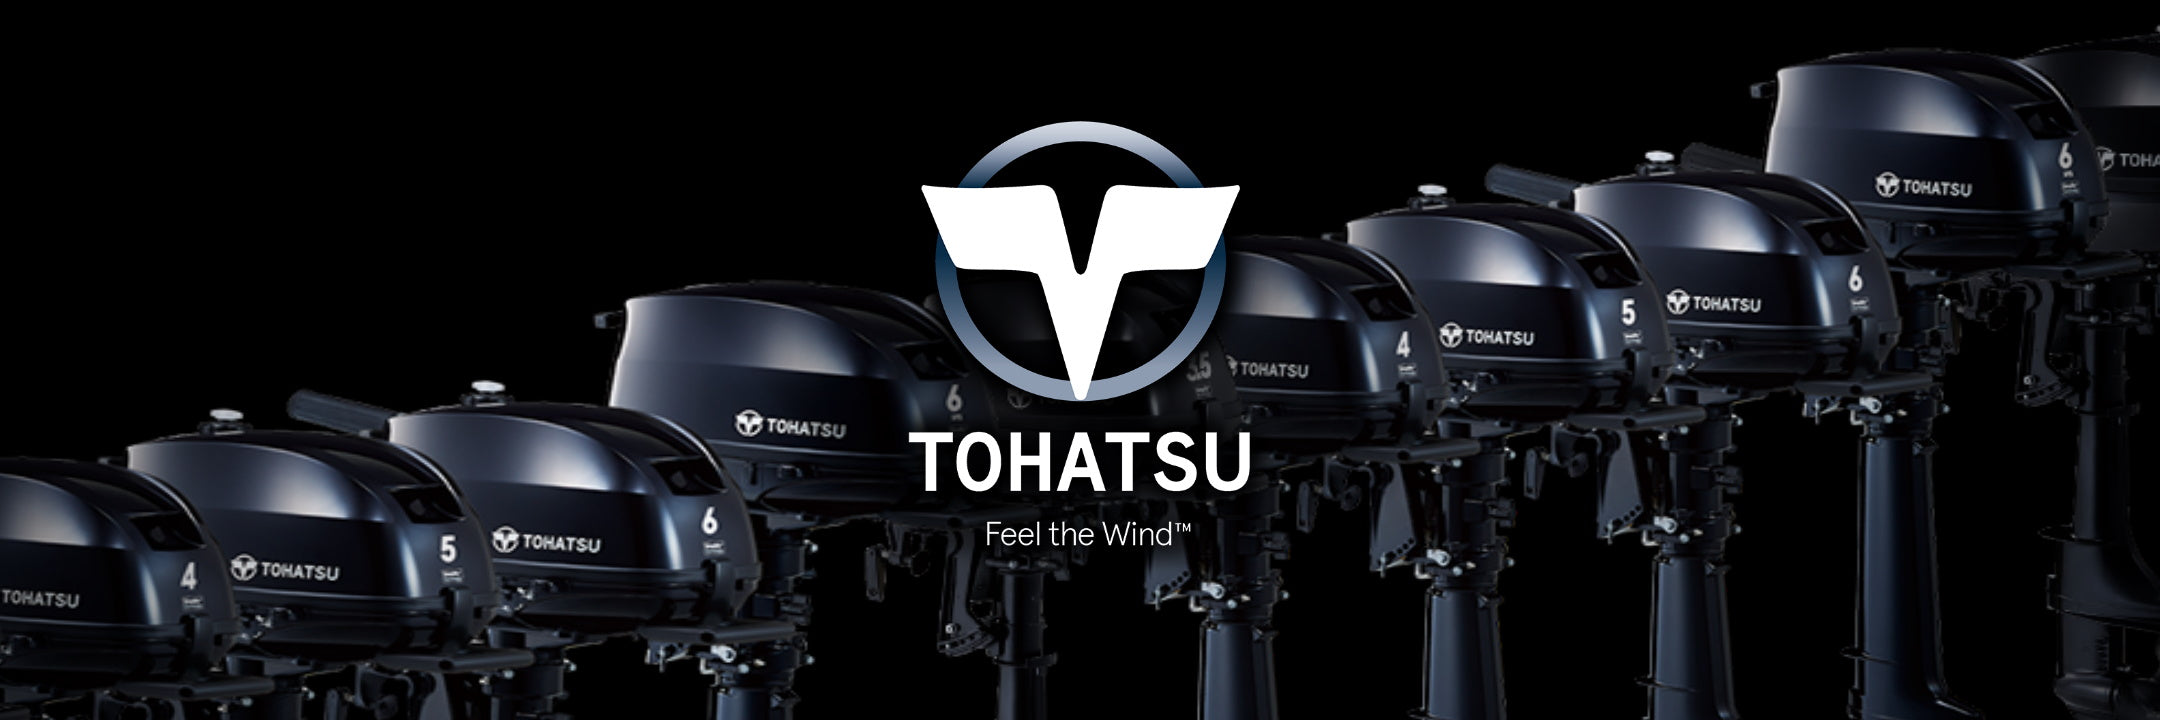 Engine Banner for Tohatsu Outboards